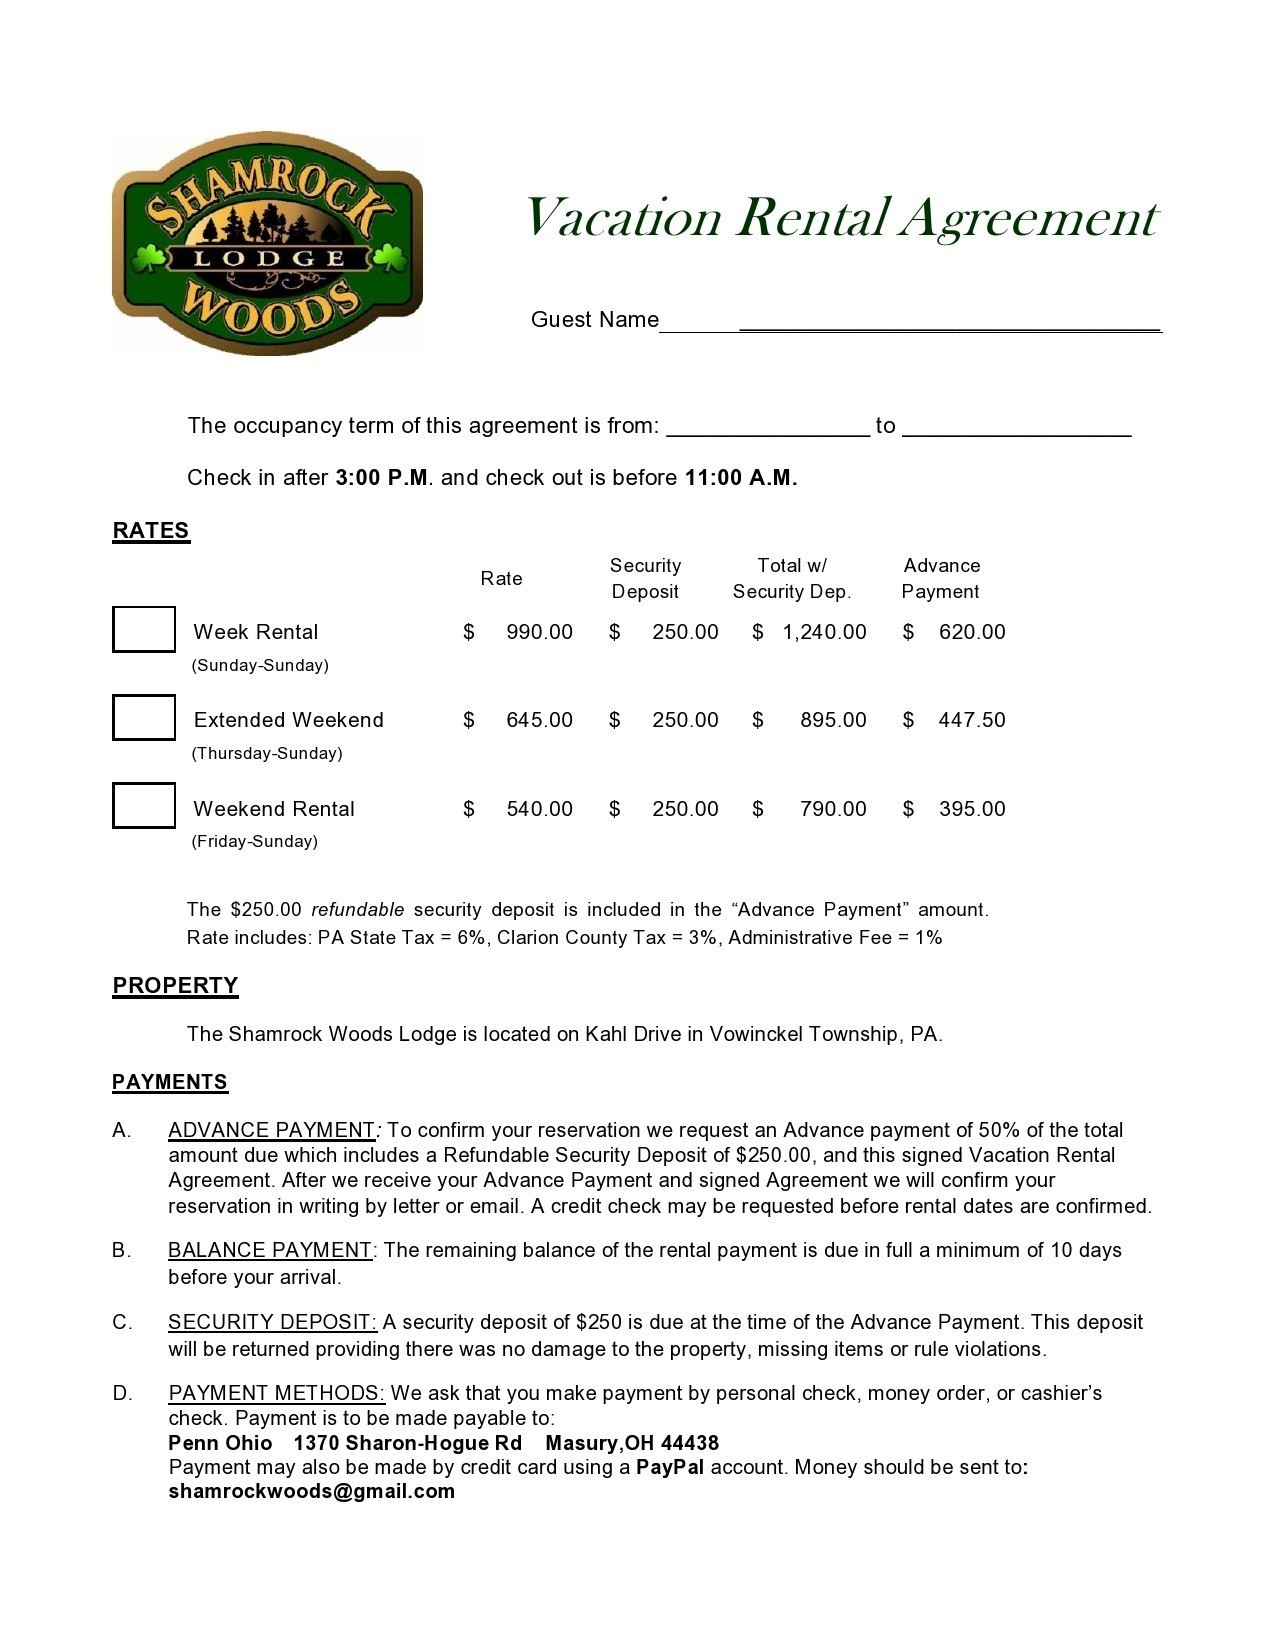 Free vacation rental agreement 08